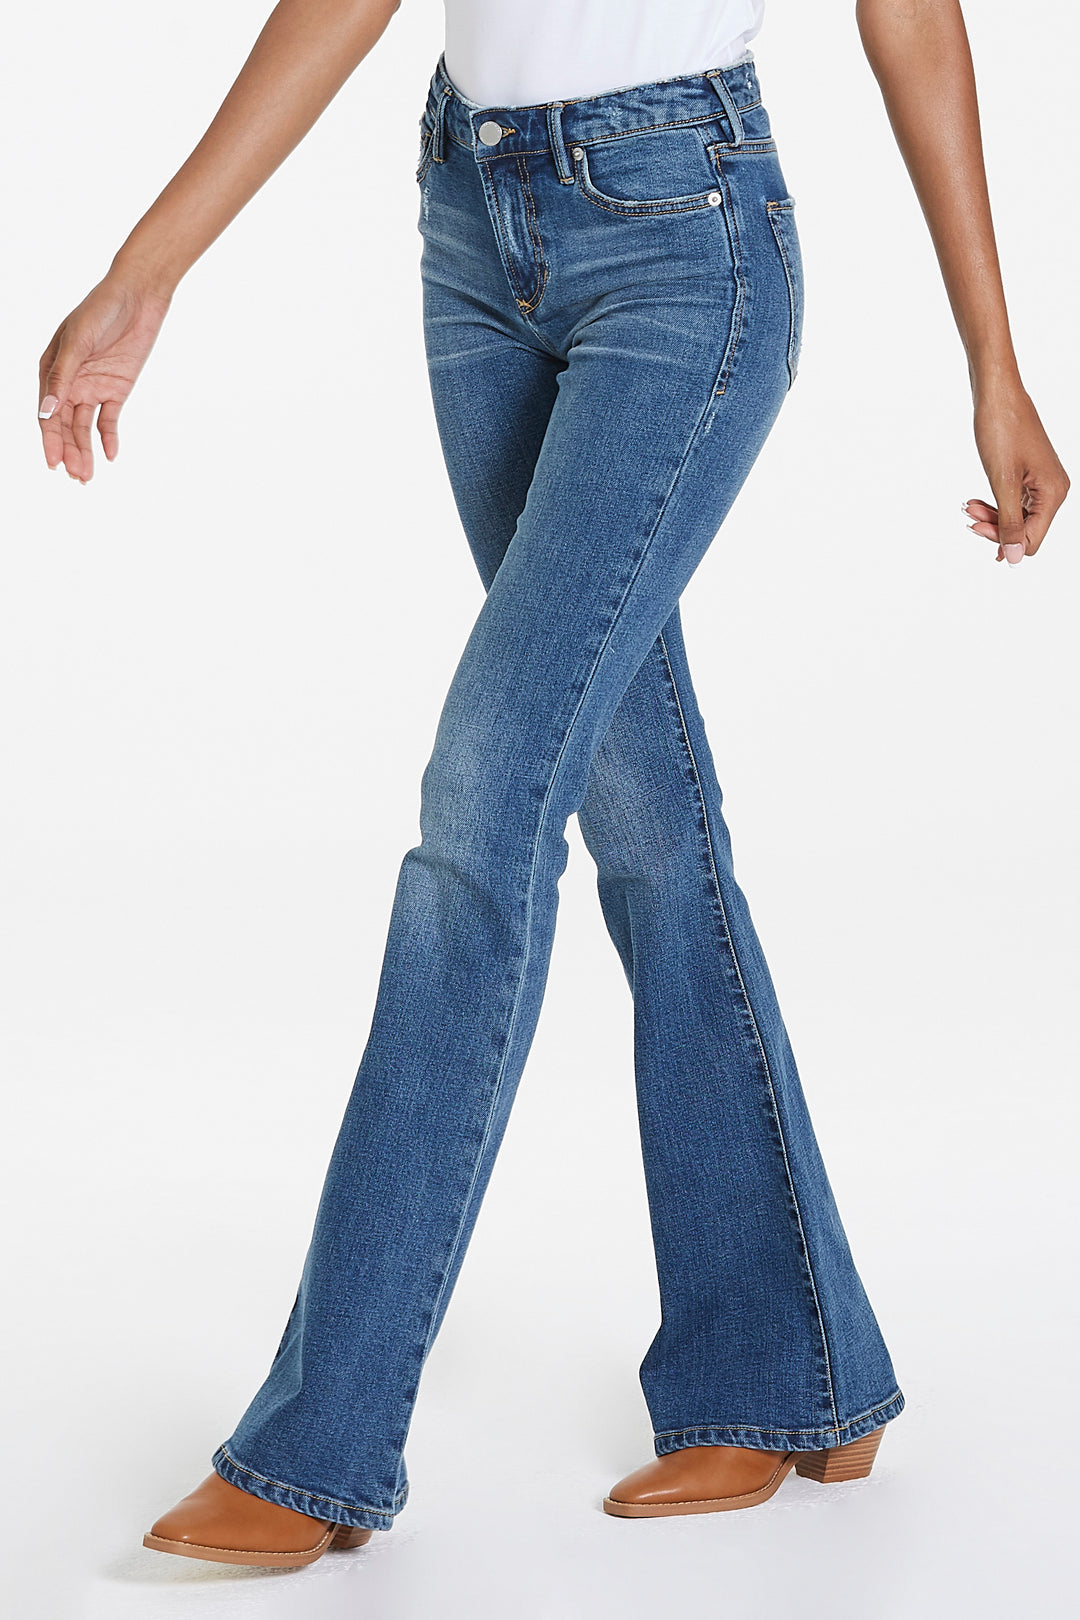 Size Chart  Jeans size chart, Cute jeans, Flare jeans